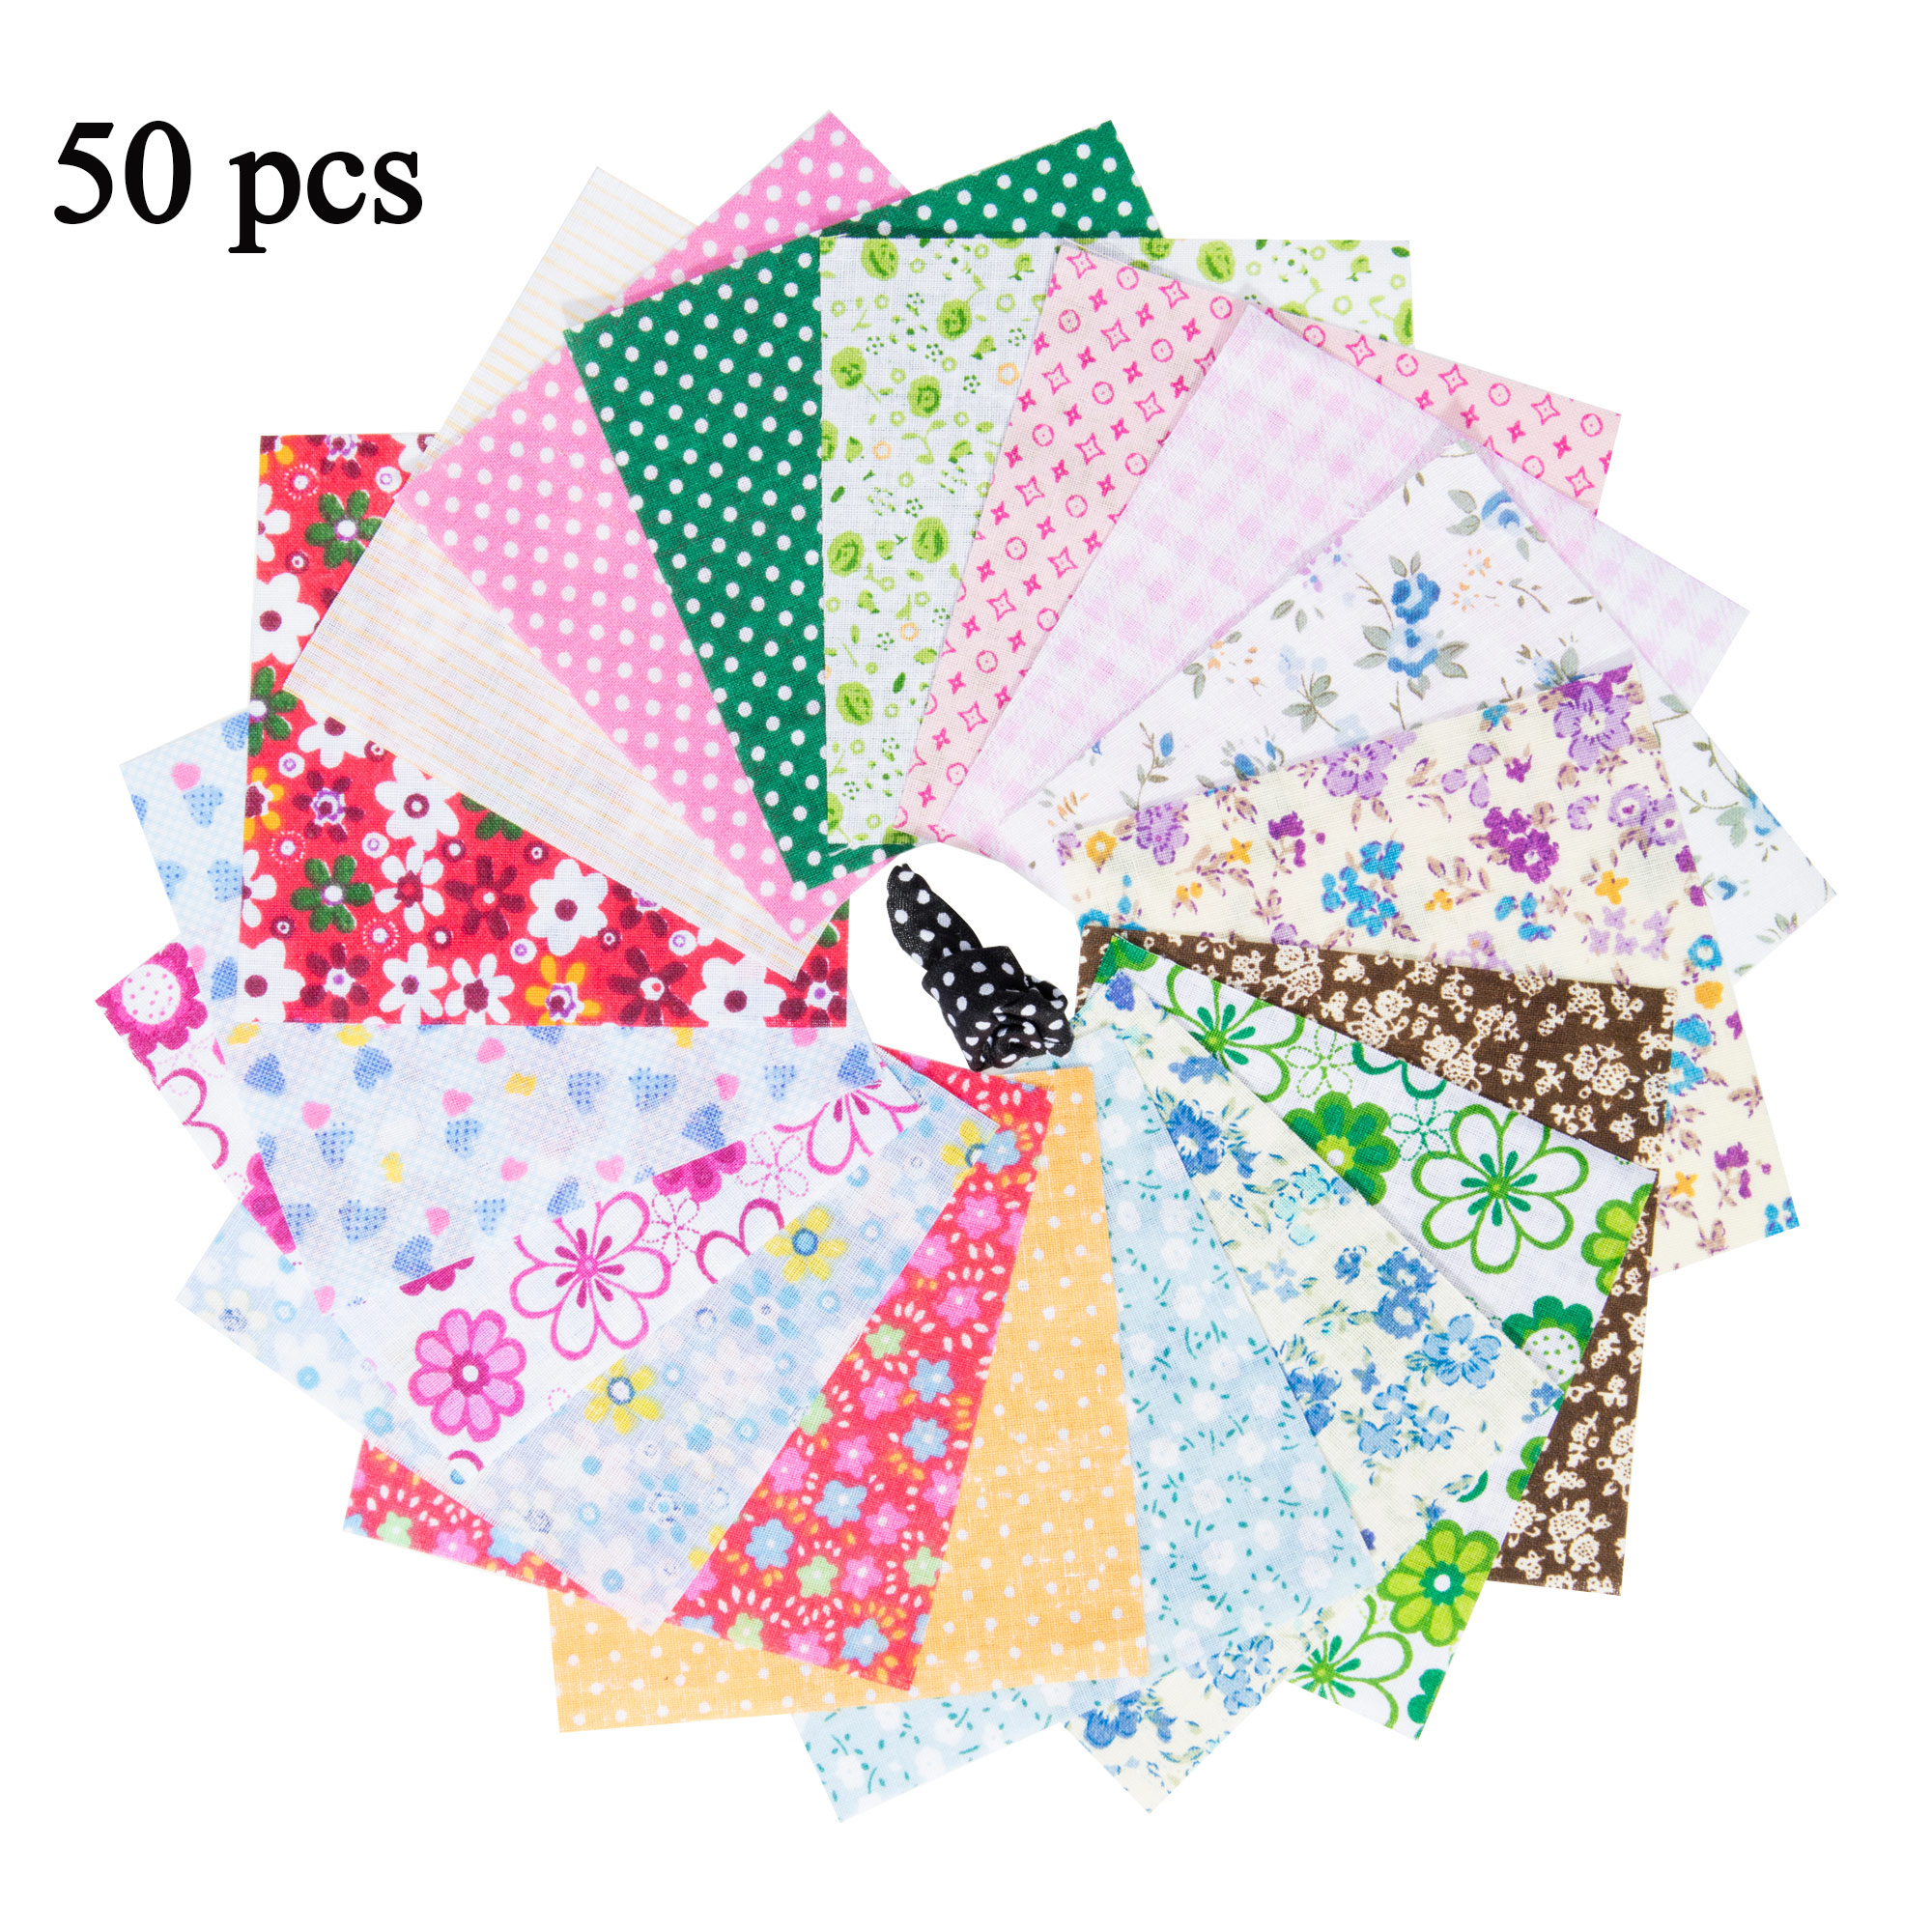 LELINTA 50Pcs DIY Handmade Floral Printed Precut Fabric Sheets Patchwork Cotton Squares Cloth Quilting Sewing Handmade Accessories Home DIY Crafts 10x10cm - image 1 of 8